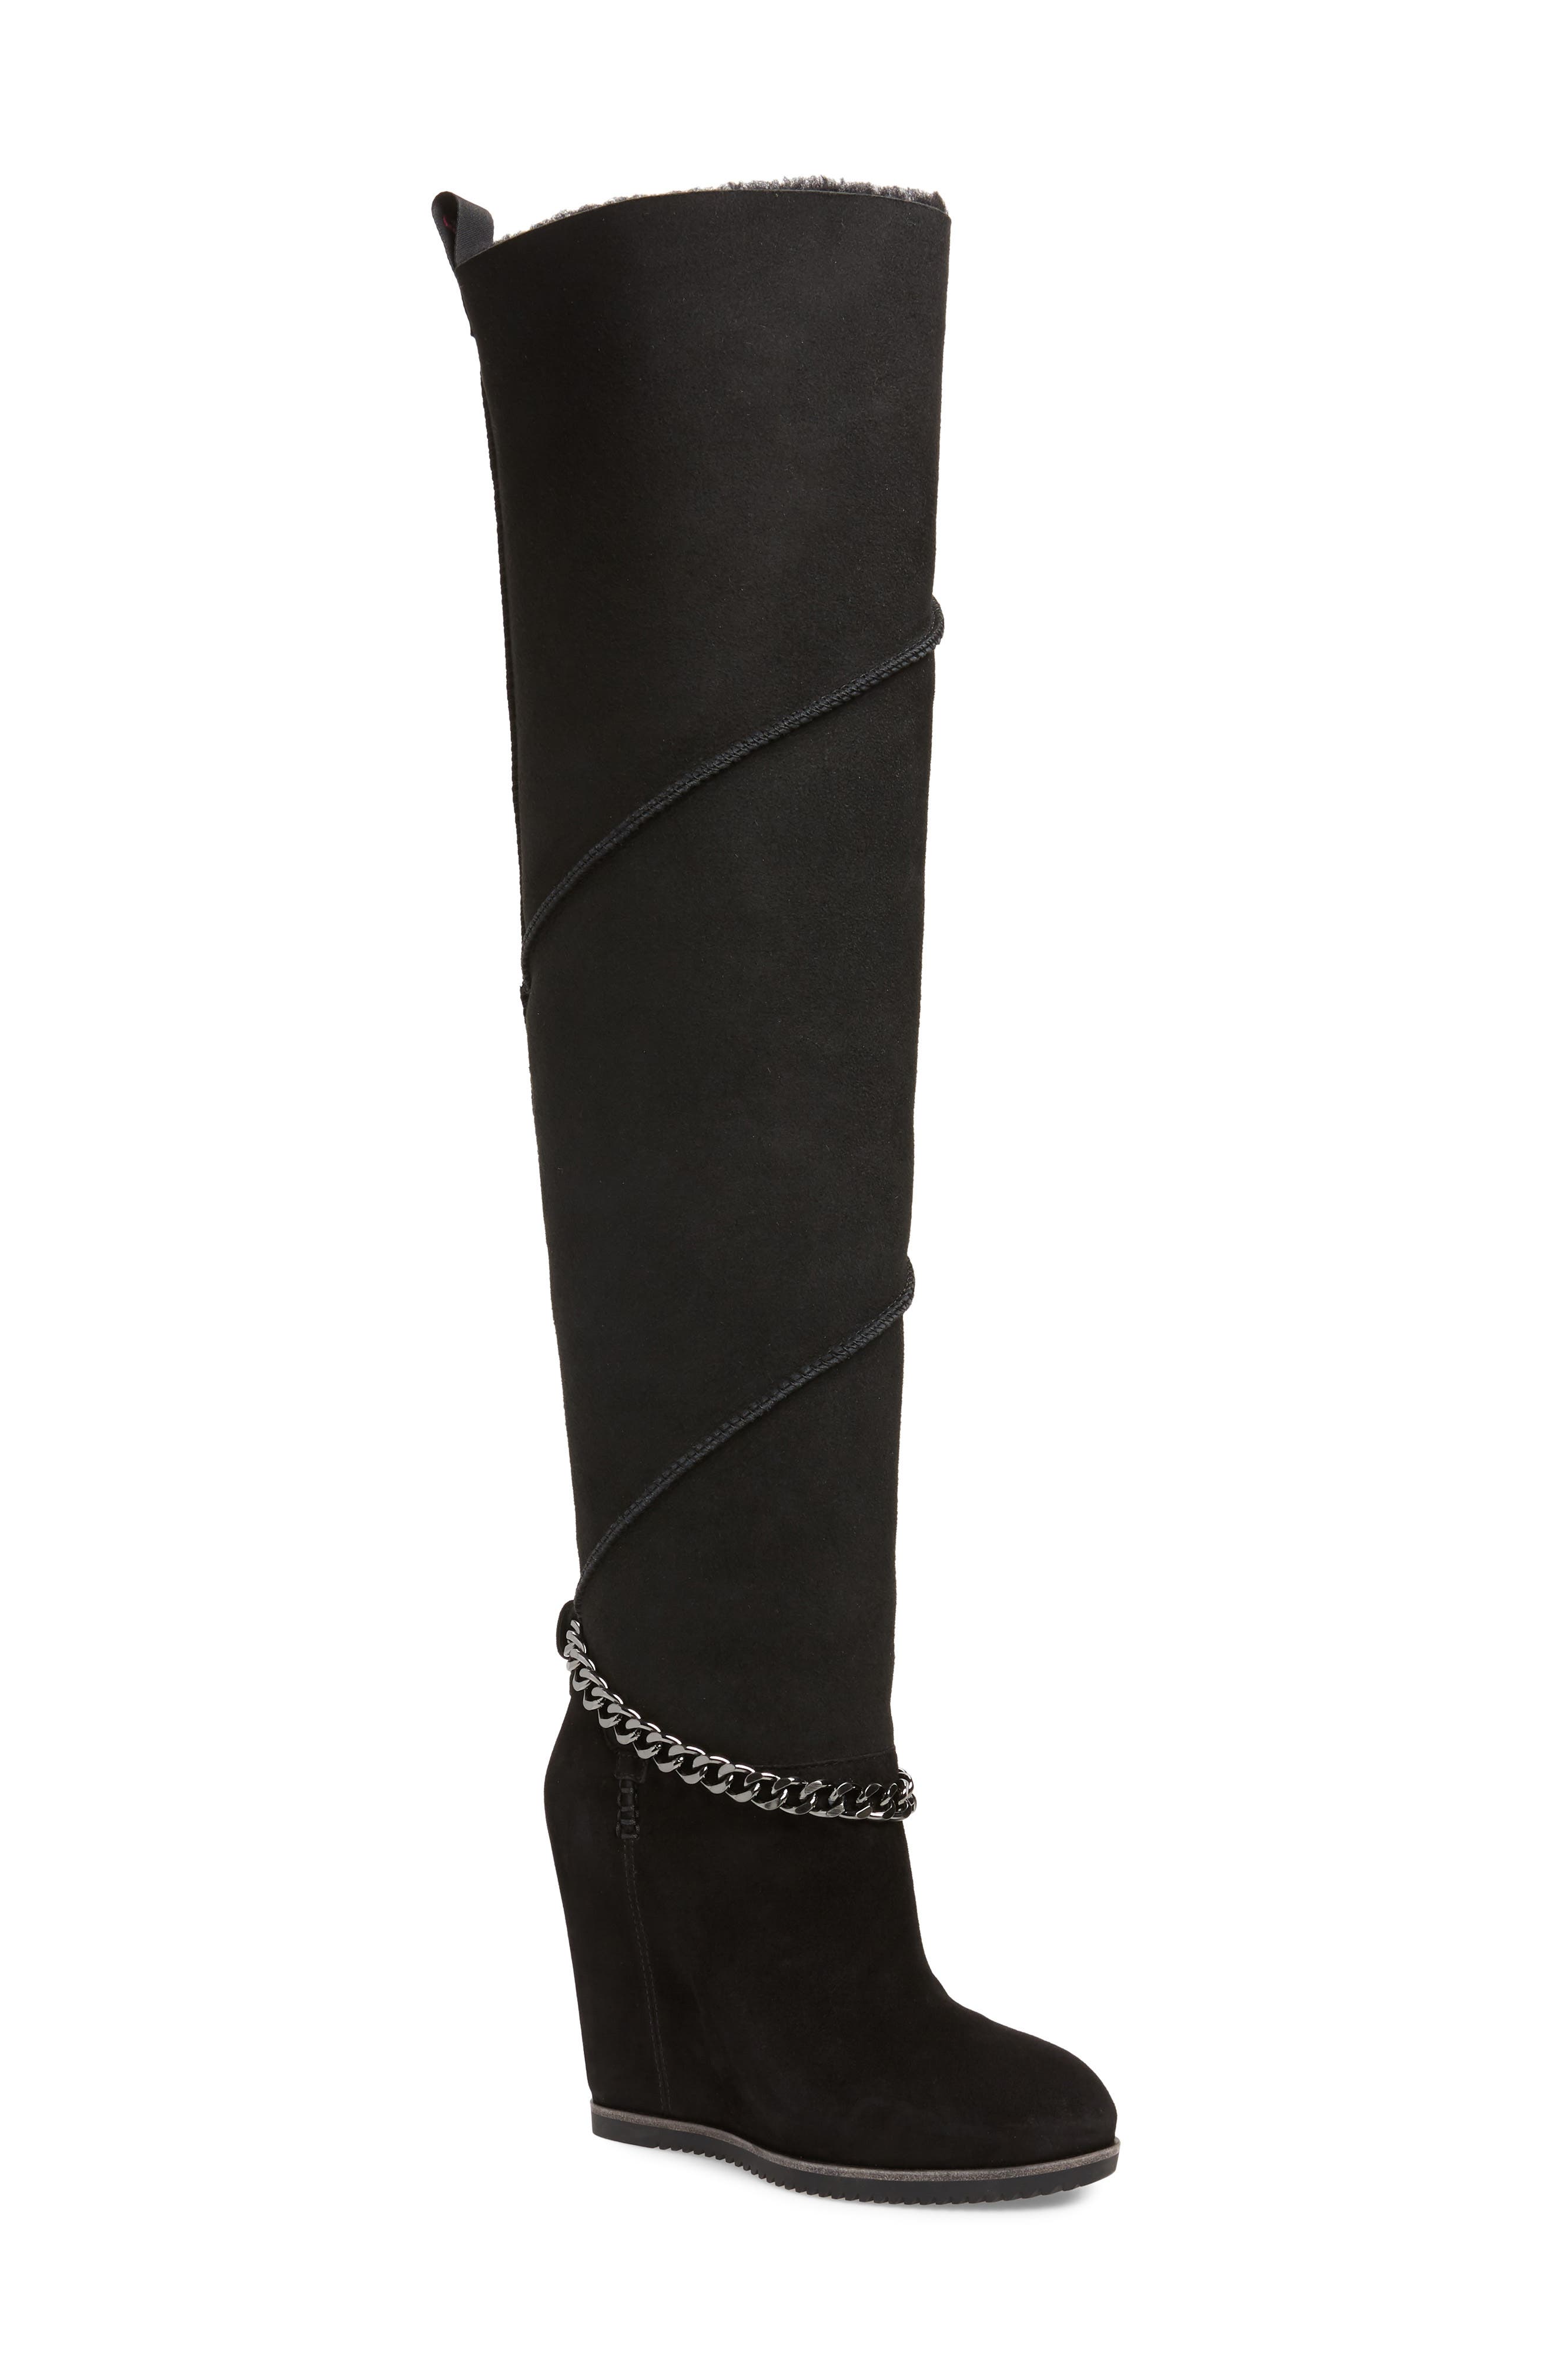 over the knee ugg boots black